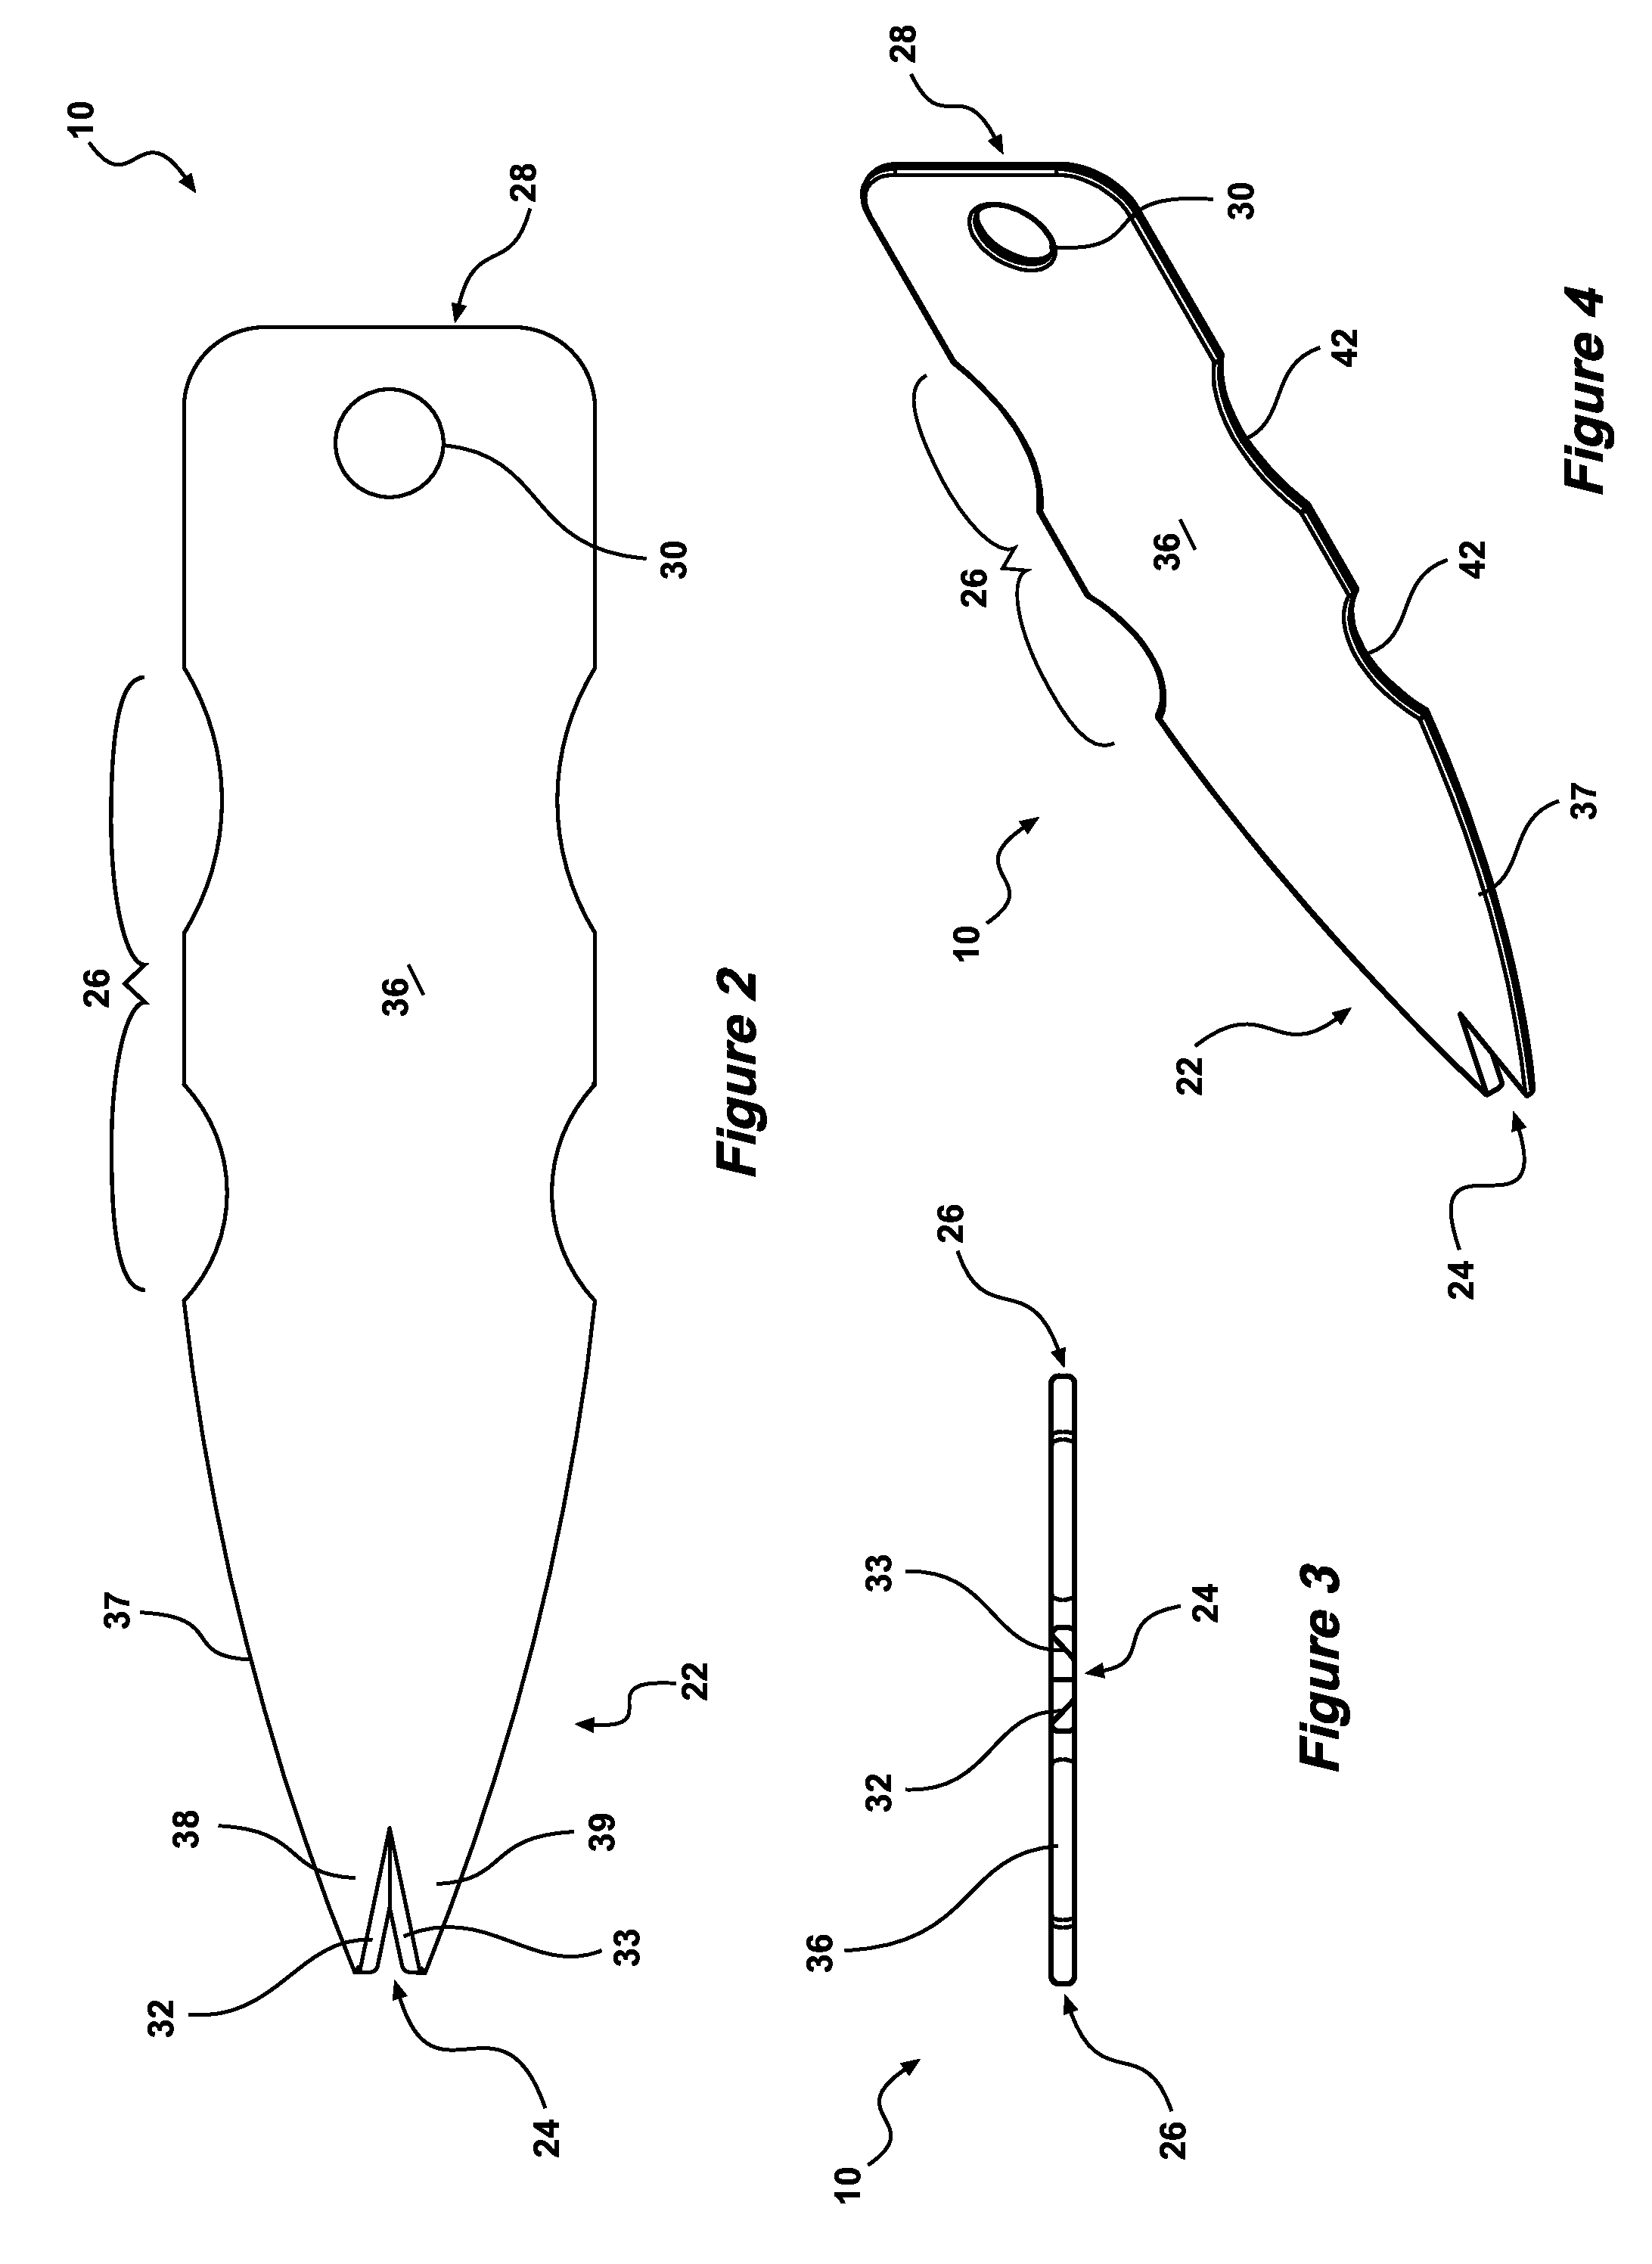 Cephalopod filleting and cleaning apparatus